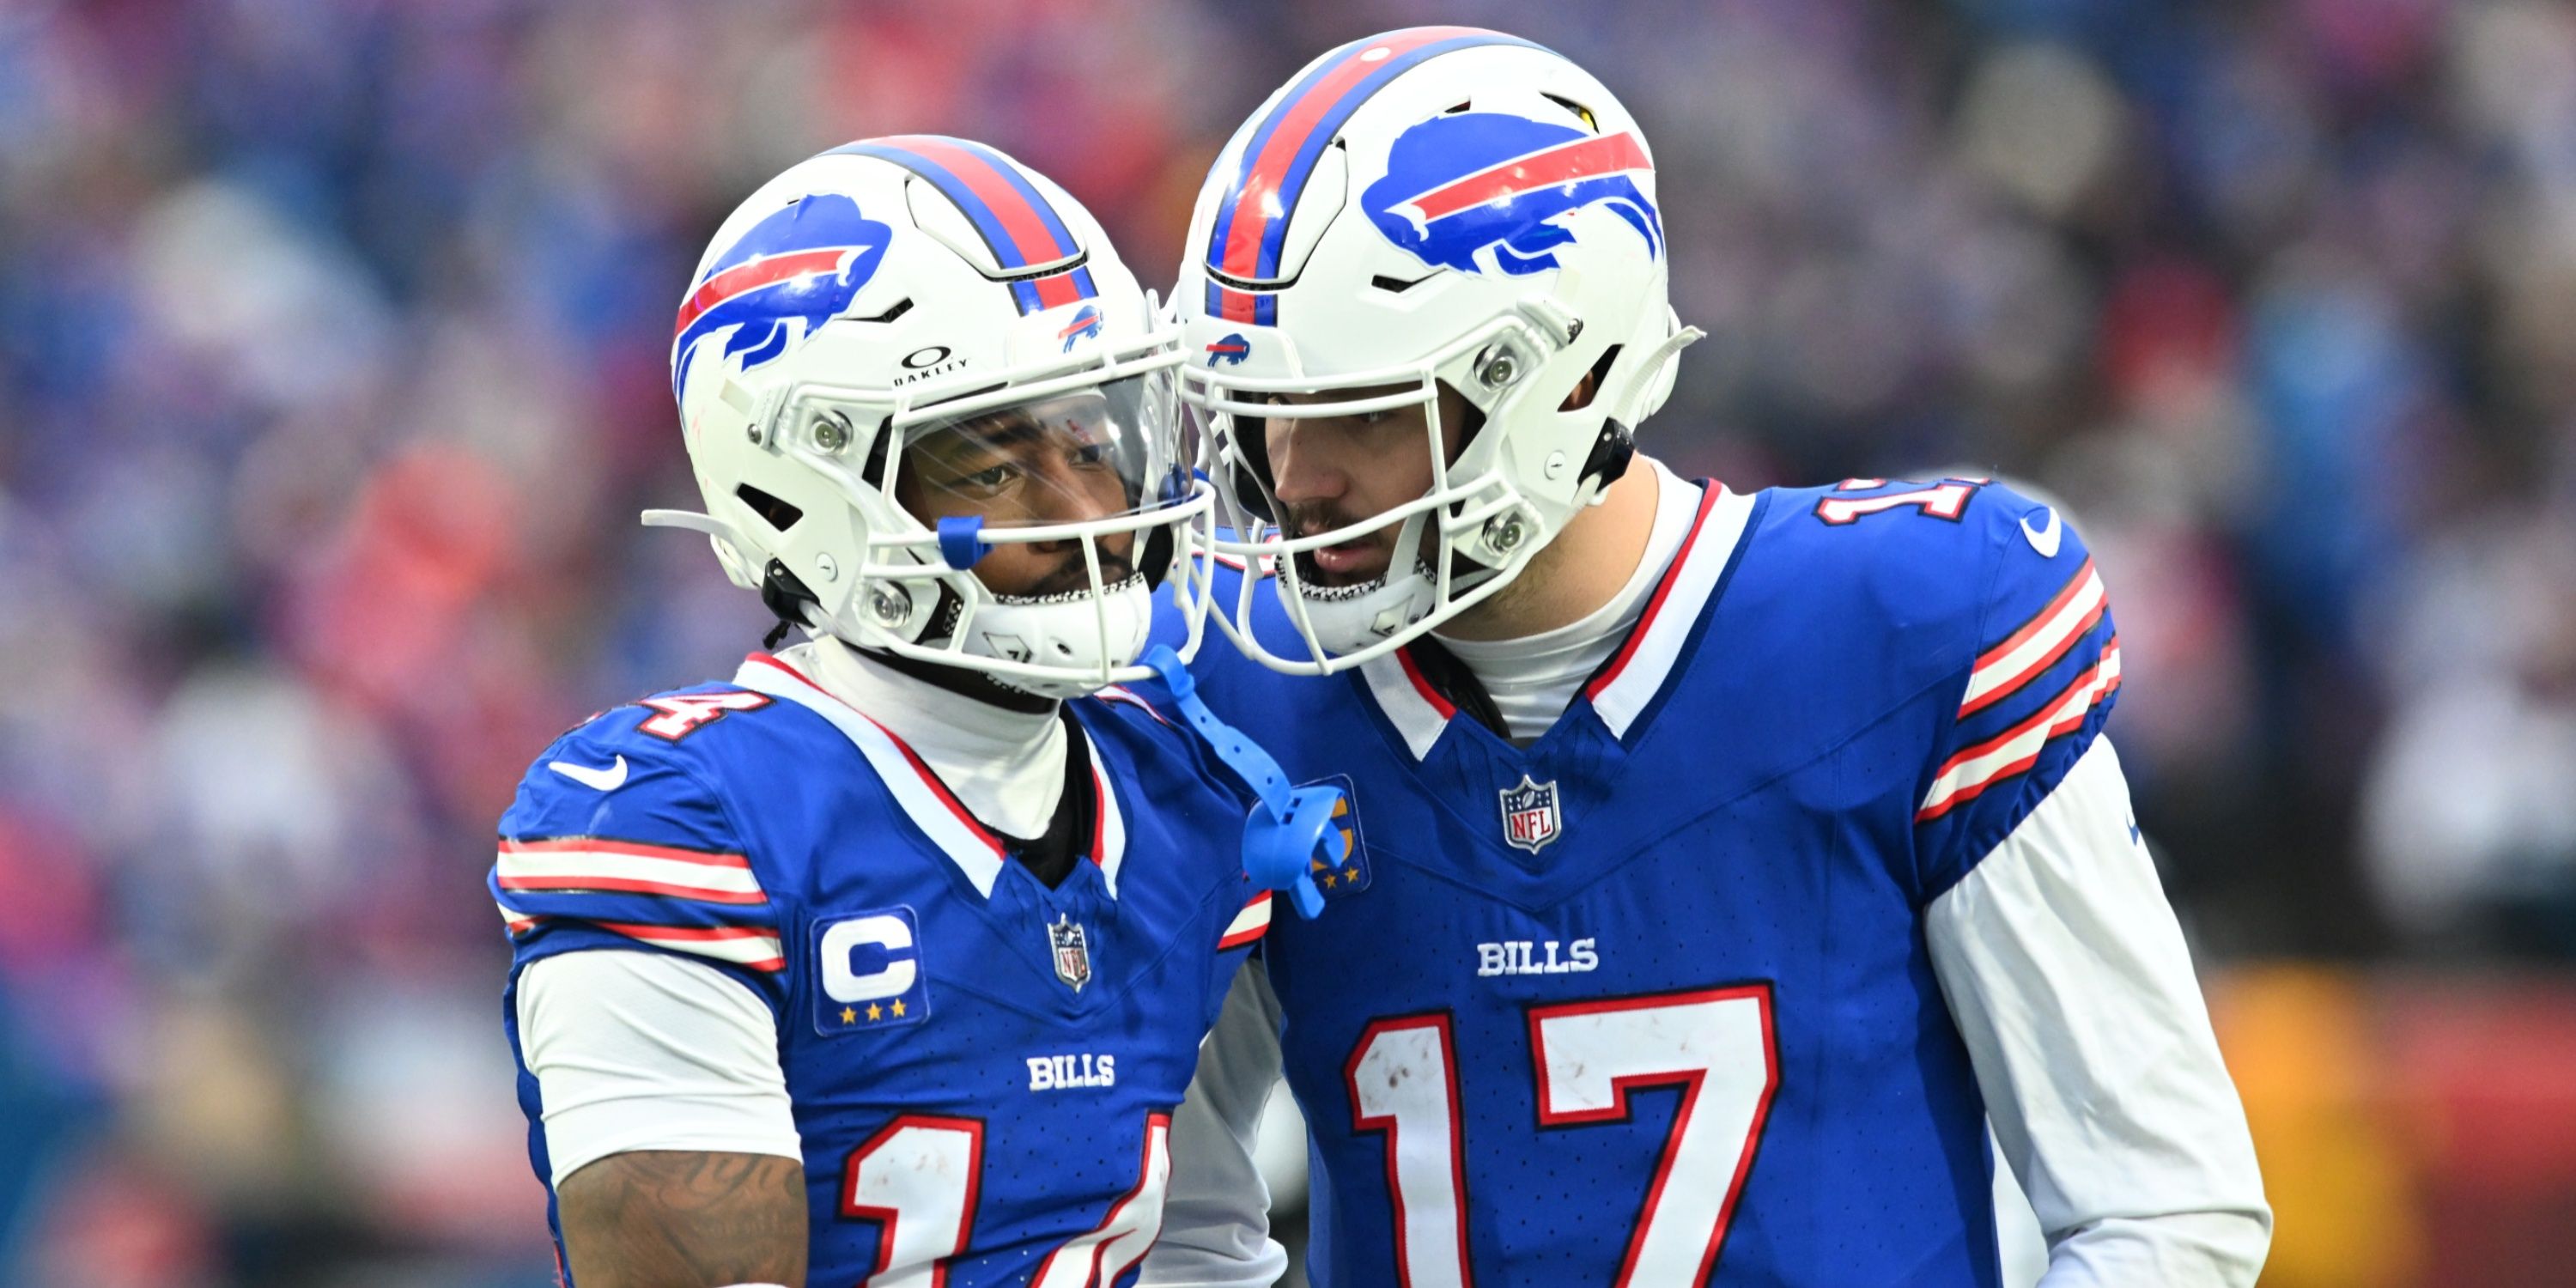 Josh Allen and Stefon Diggs celebrate a play 